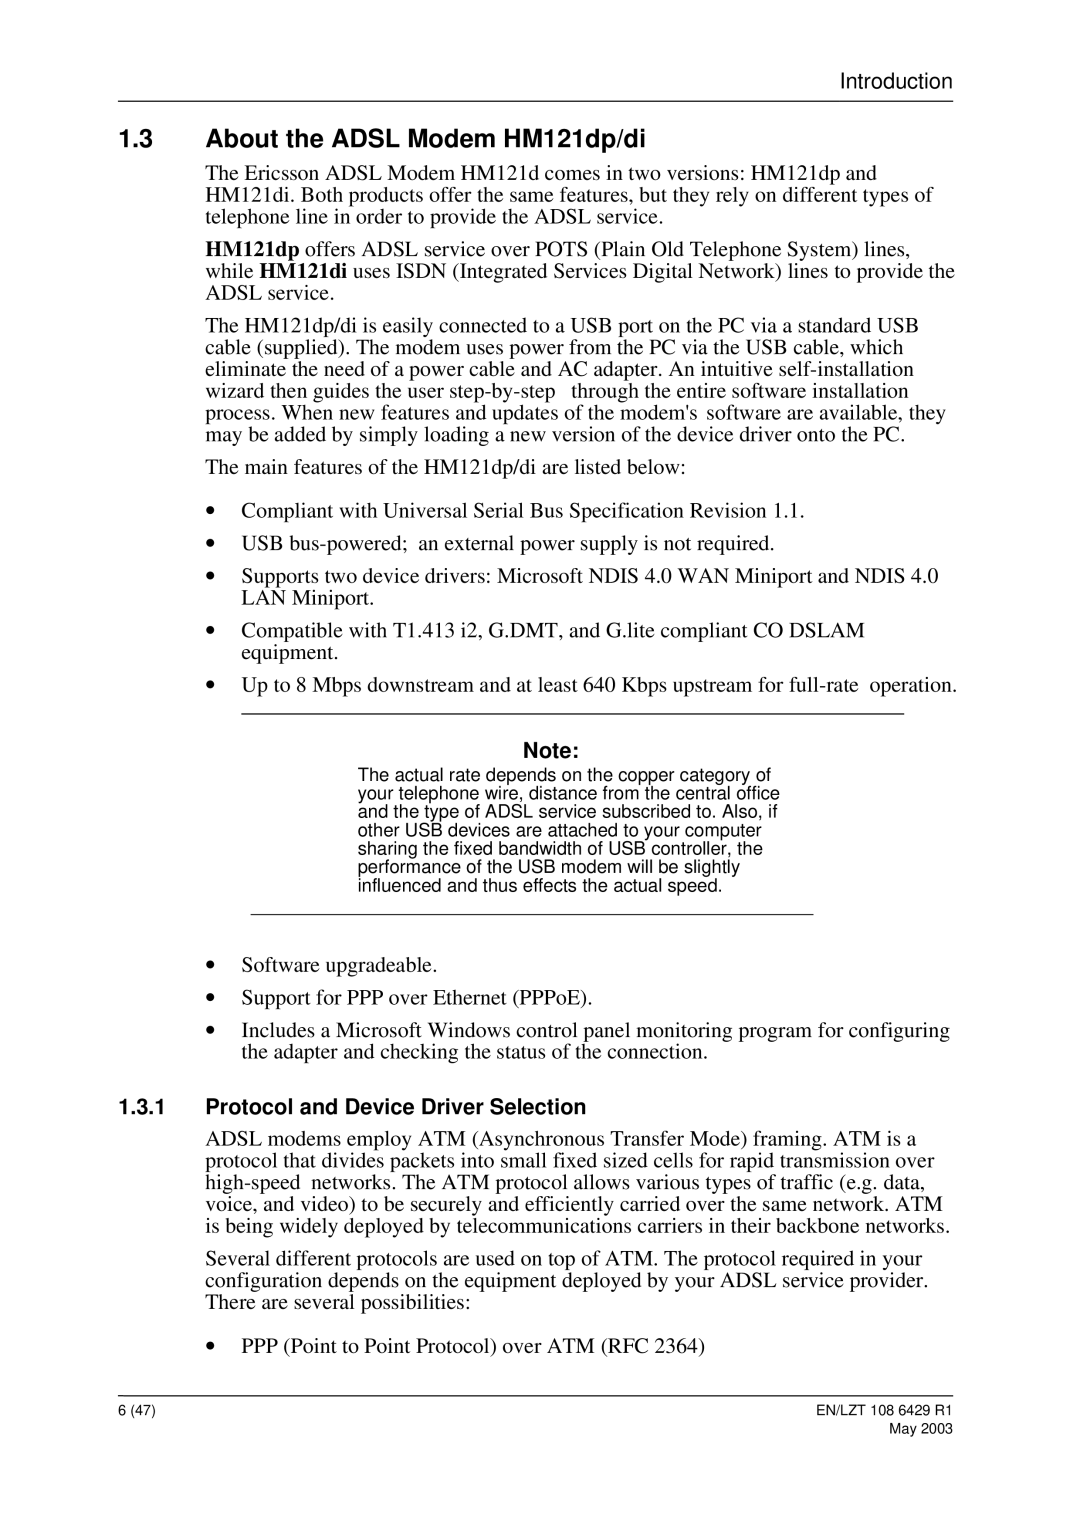 Ericsson HM121di manual About the Adsl Modem HM121dp/di, Protocol and Device Driver Selection 